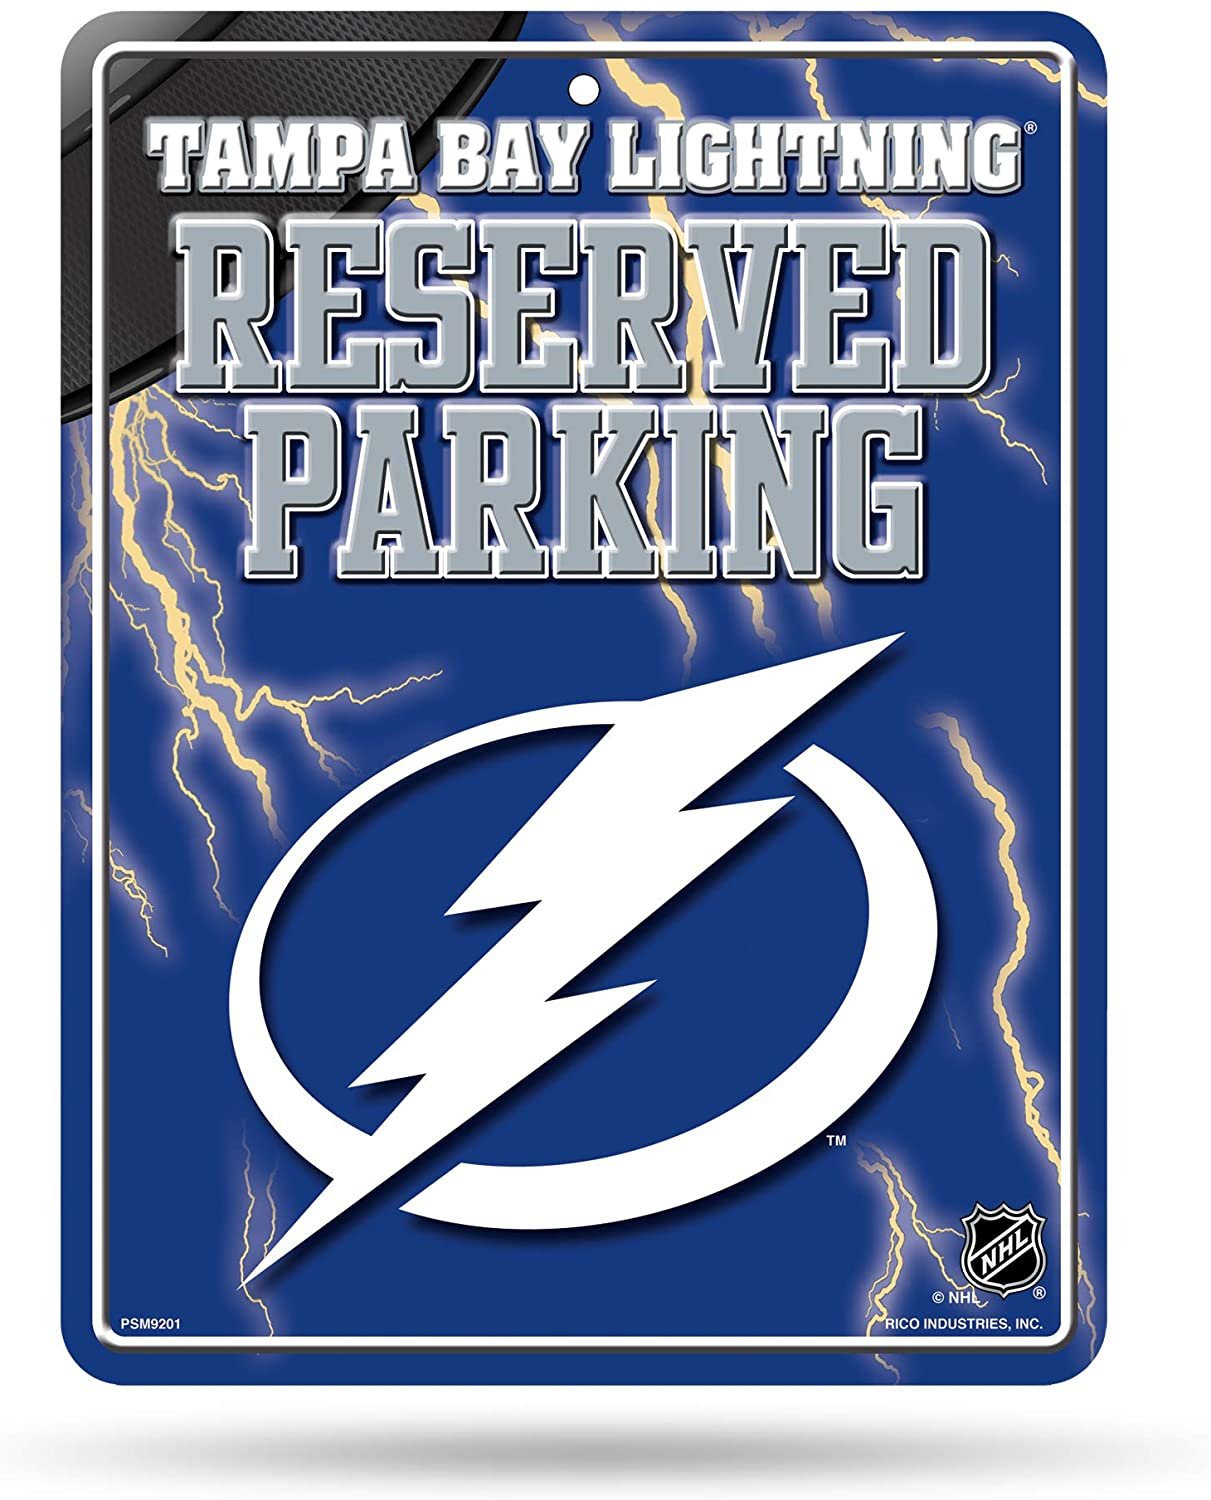 Tampa Bay Lightning 8-Inch by 11-Inch Metal Parking Sign Décor